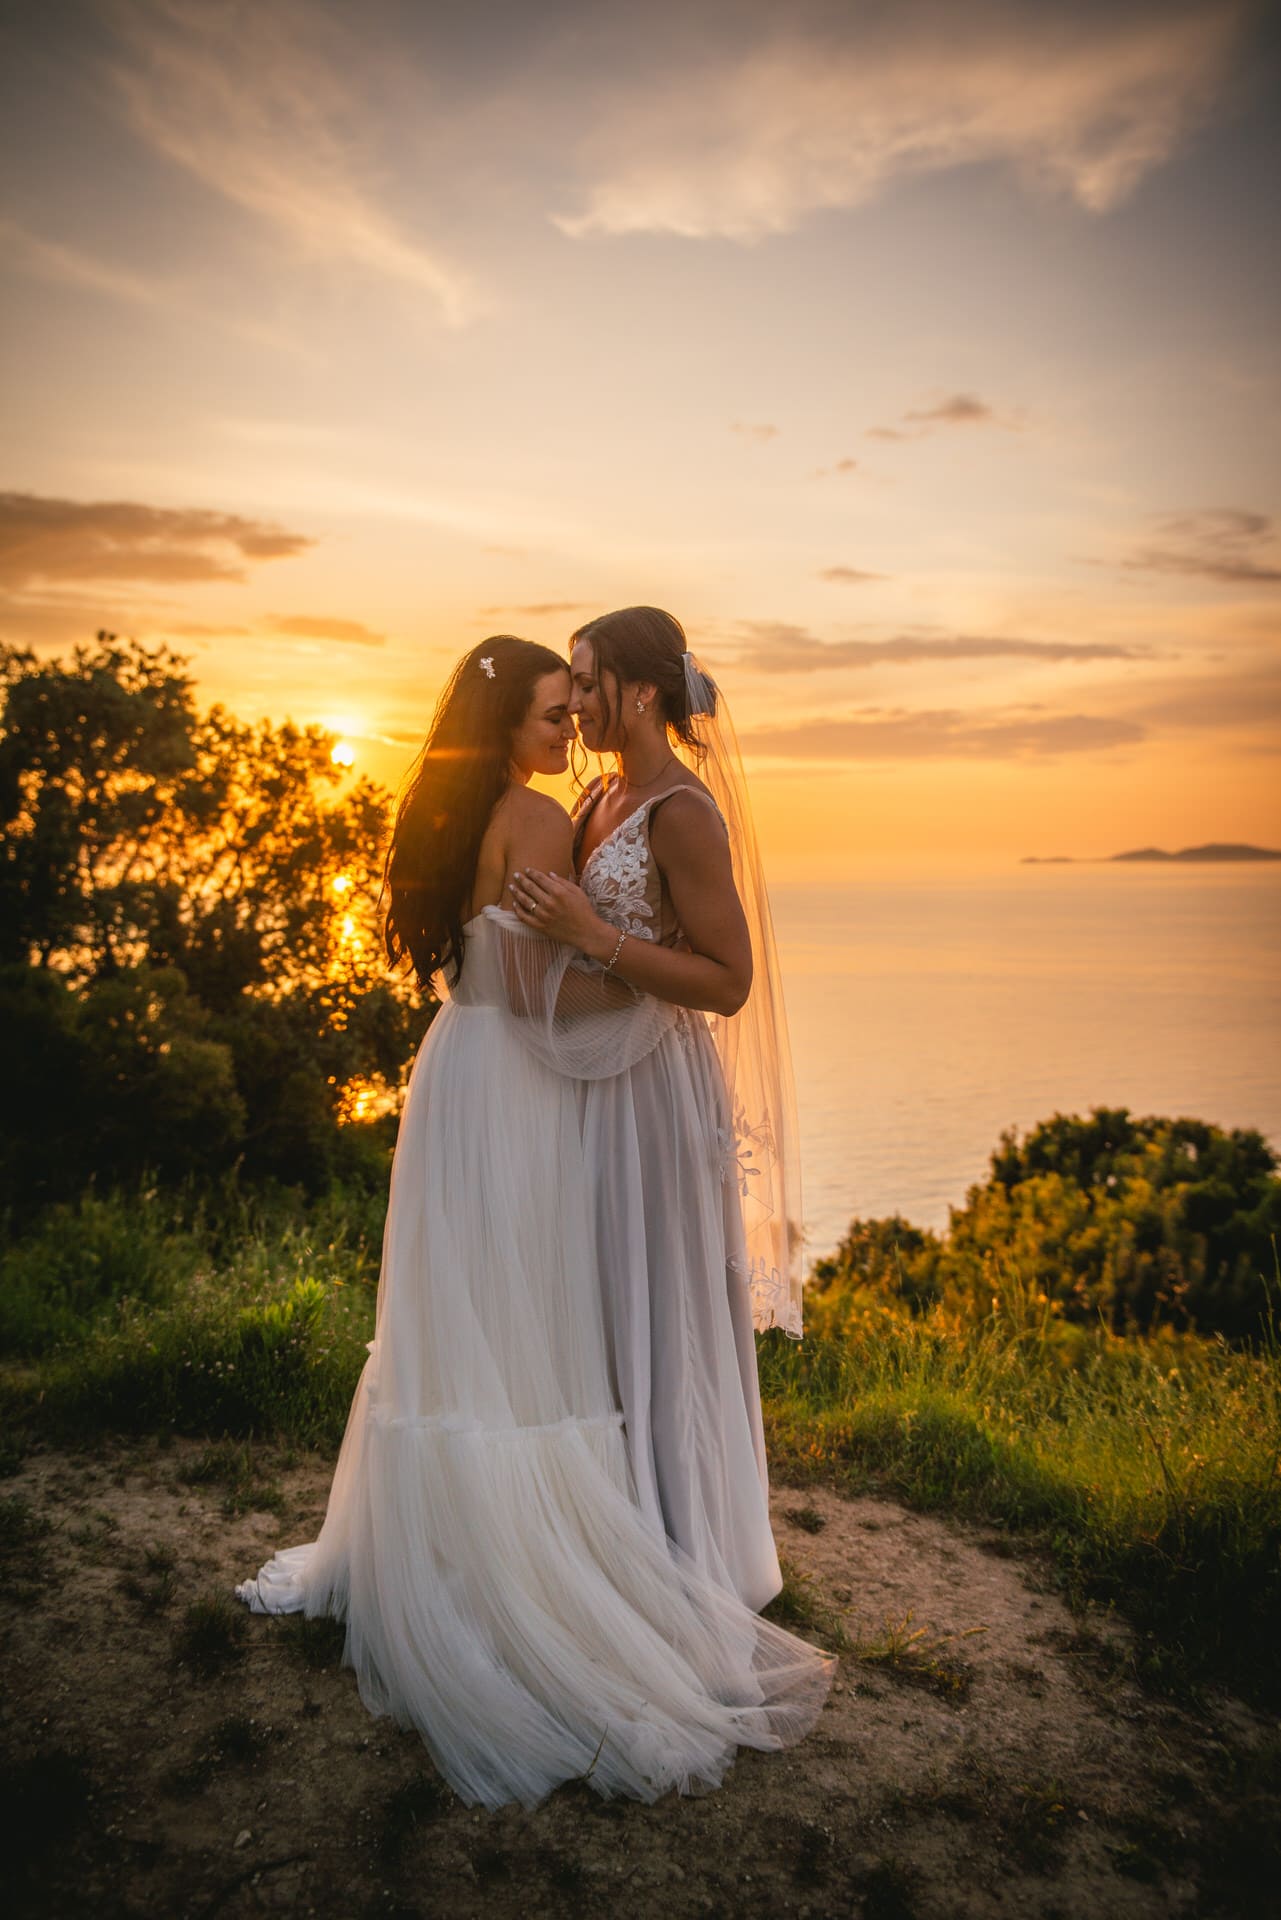 Bride's first dance illuminated by the sunset, a magical moment in Corfu elopement.